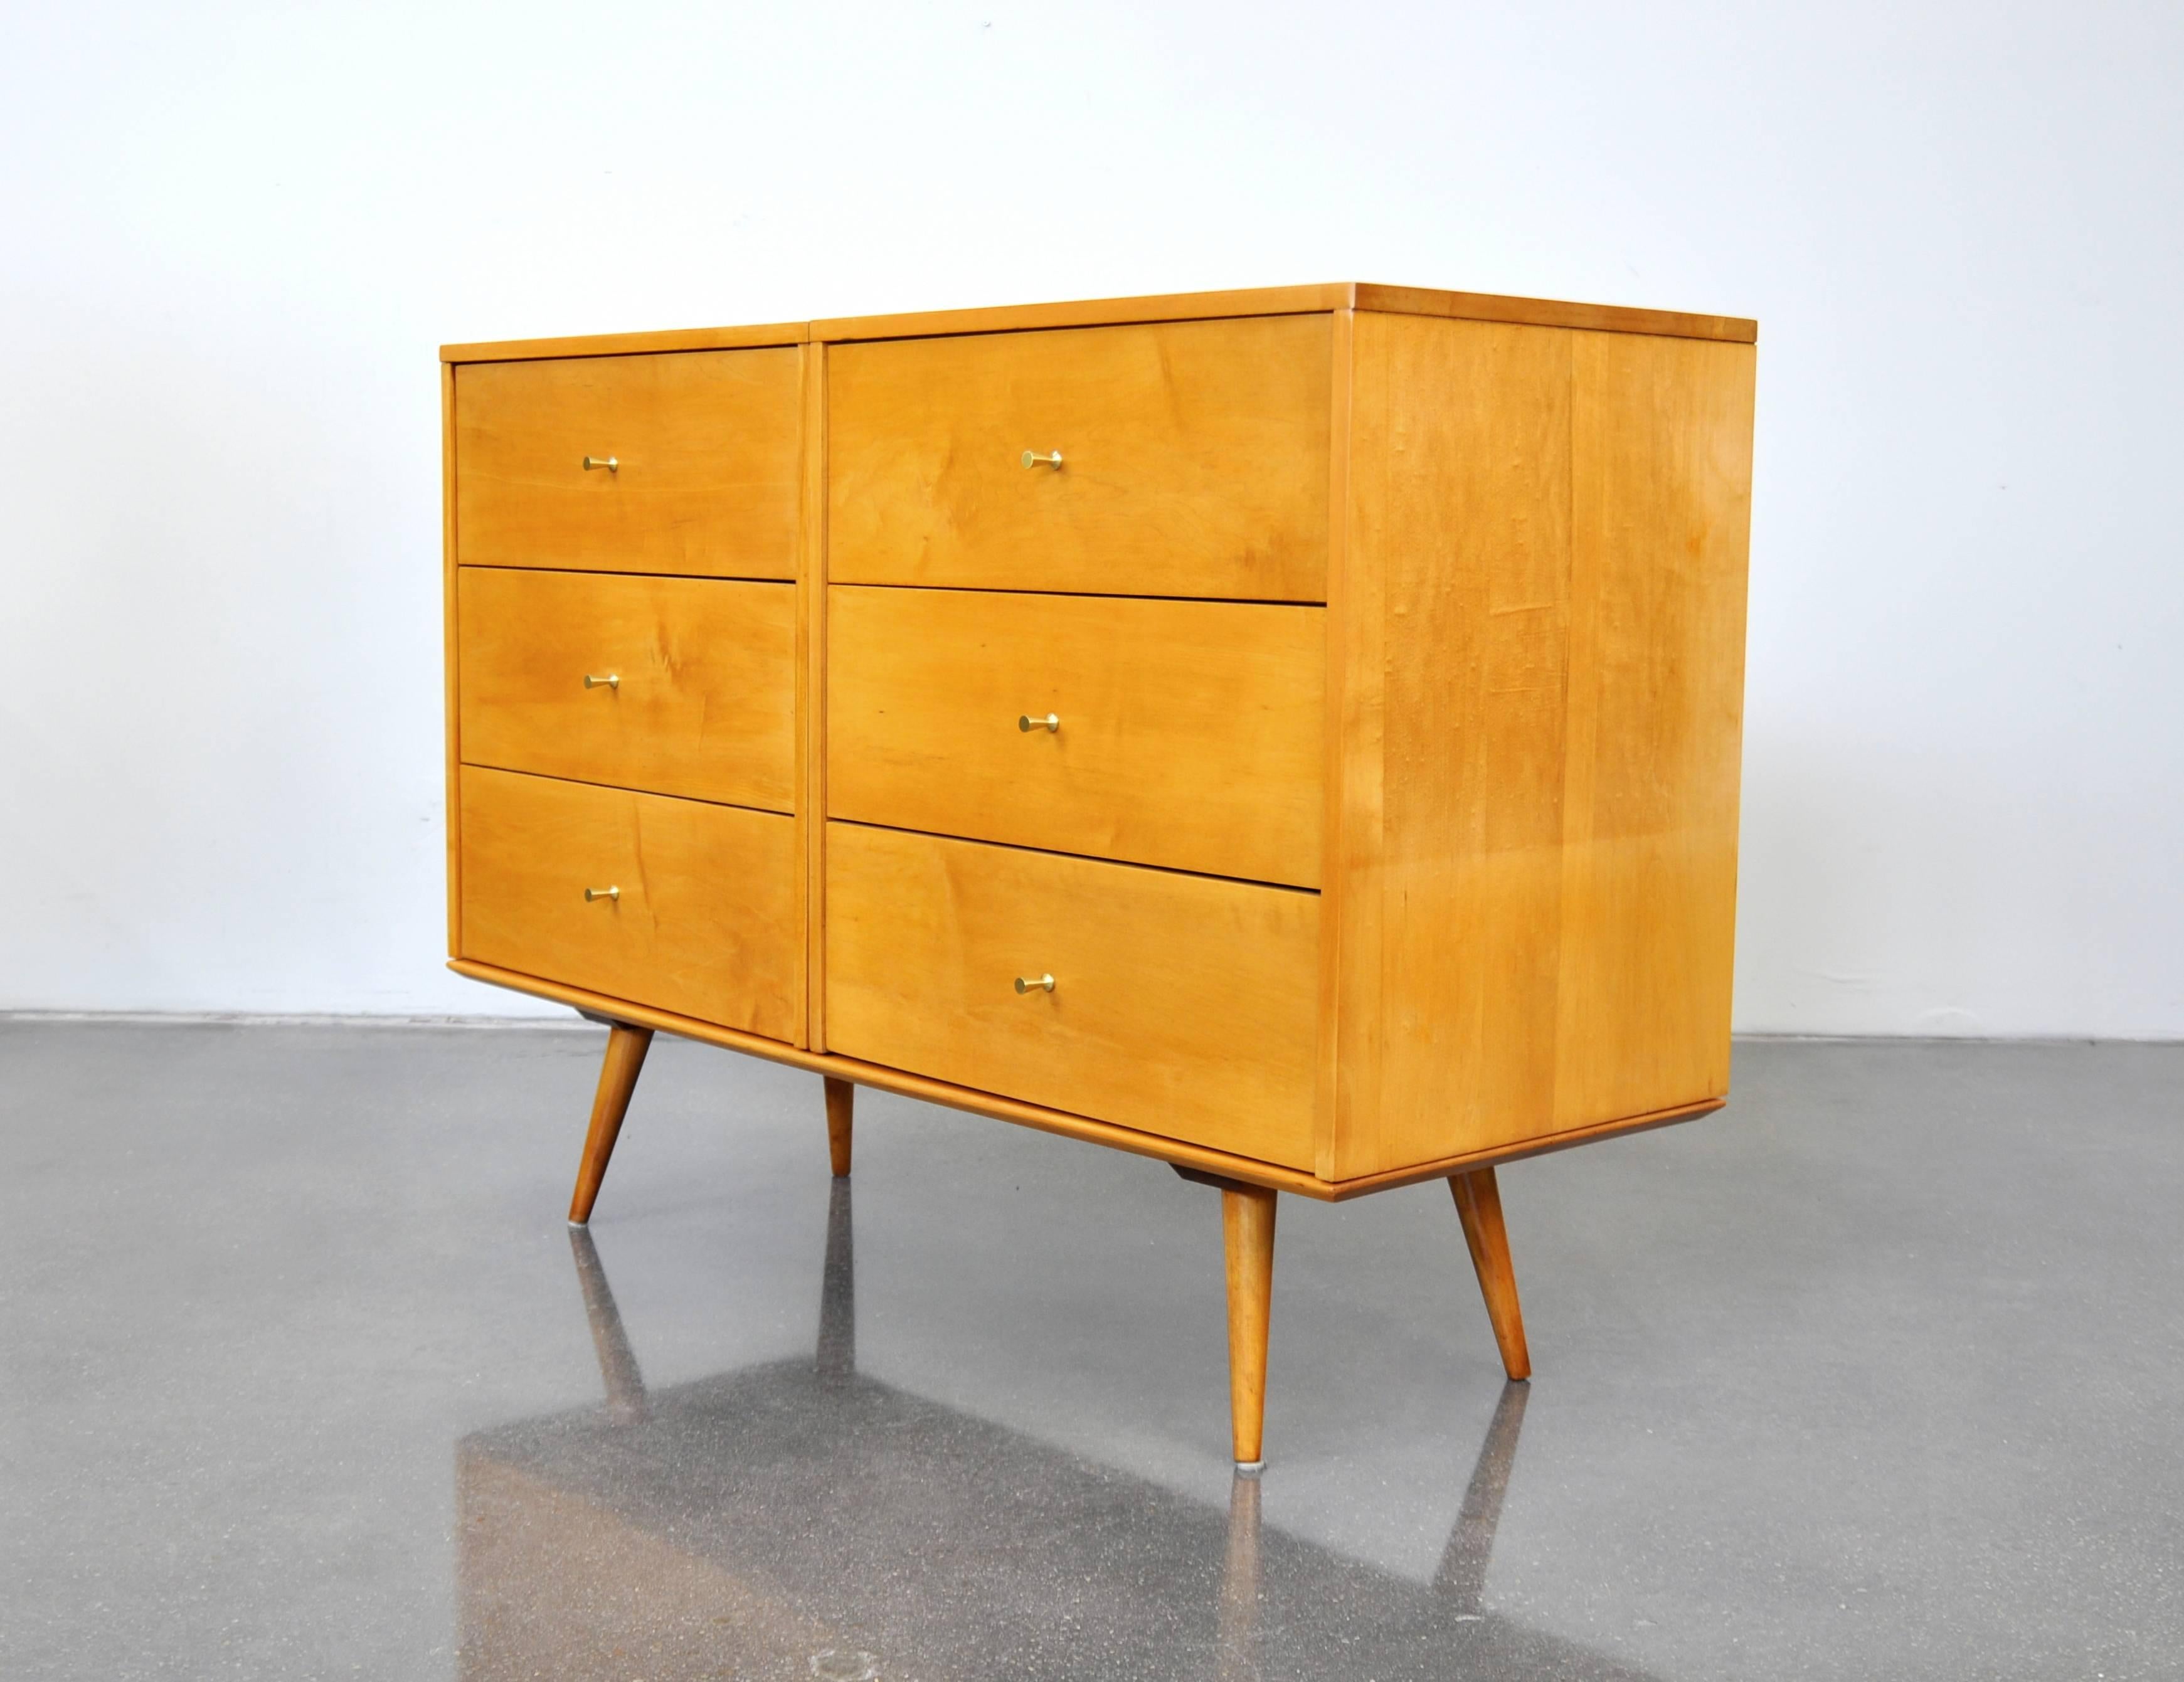 Mid-Century Modern vintage six-drawer dresser designed by Paul McCobb for his modular Planner Group line made by Winchendon Furniture in the 1950s. Professionally refinished. Versatile case piece that can be used with either one or both columns of